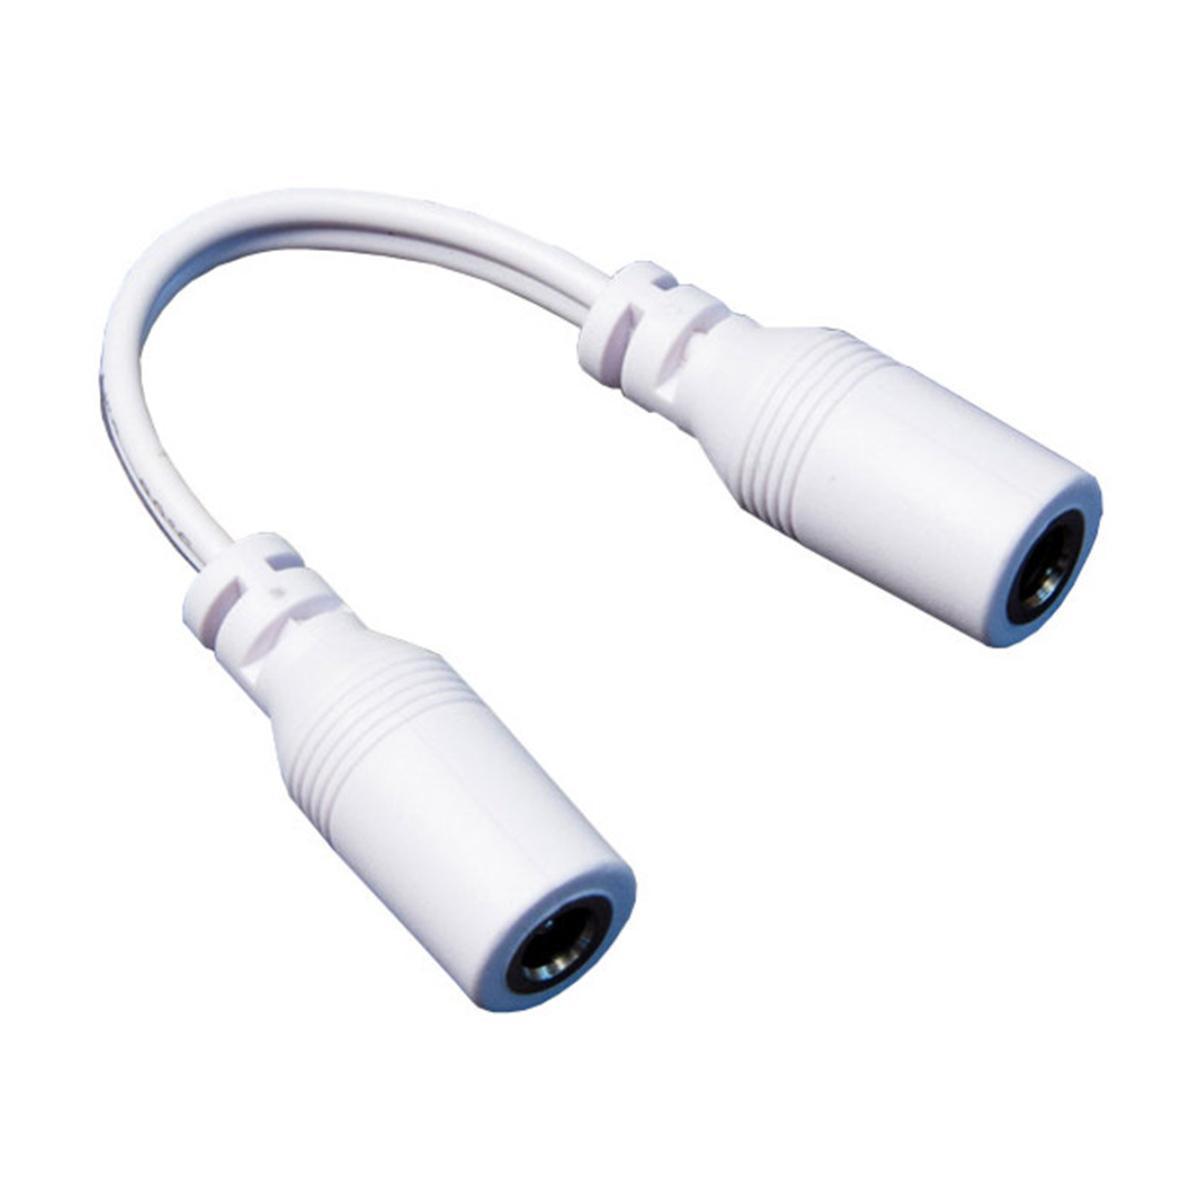 3in. female to female Cable Connector For GM Under Cabinet Lighting, White